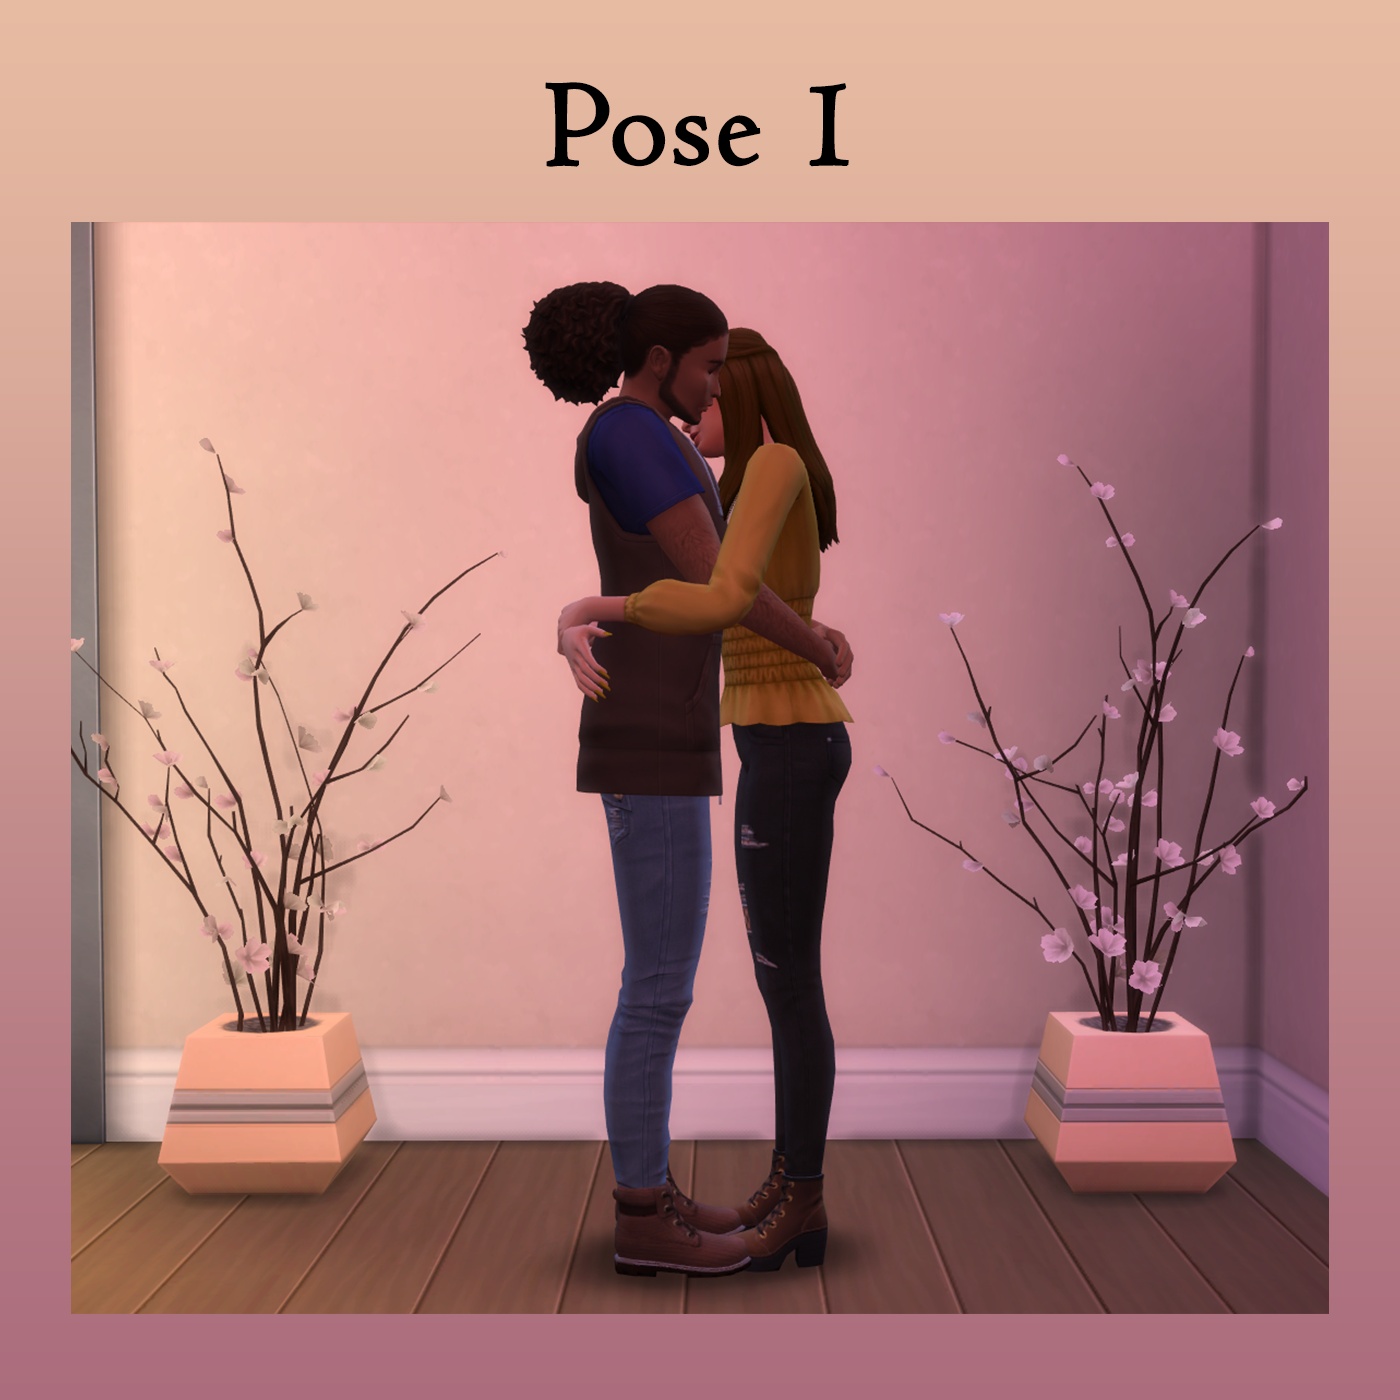 Prom Night Pose Pack - The Sims 4 Mods - CurseForge